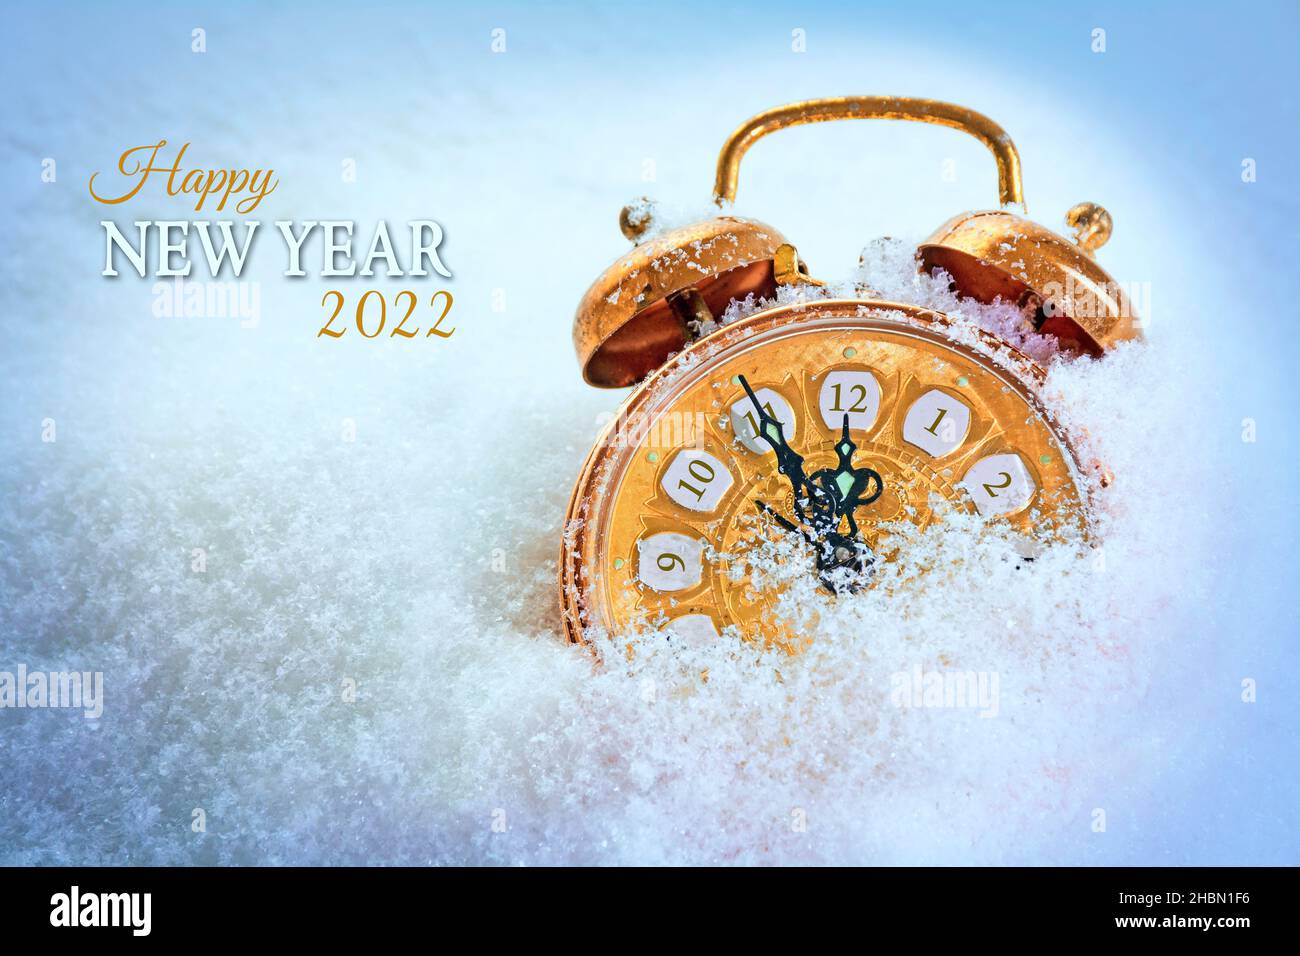 copper colored vintage alarm clock in the snow pointing five minutes before twelve, text Happy New Year 2022, seasonal greeting card with copy space Stock Photo